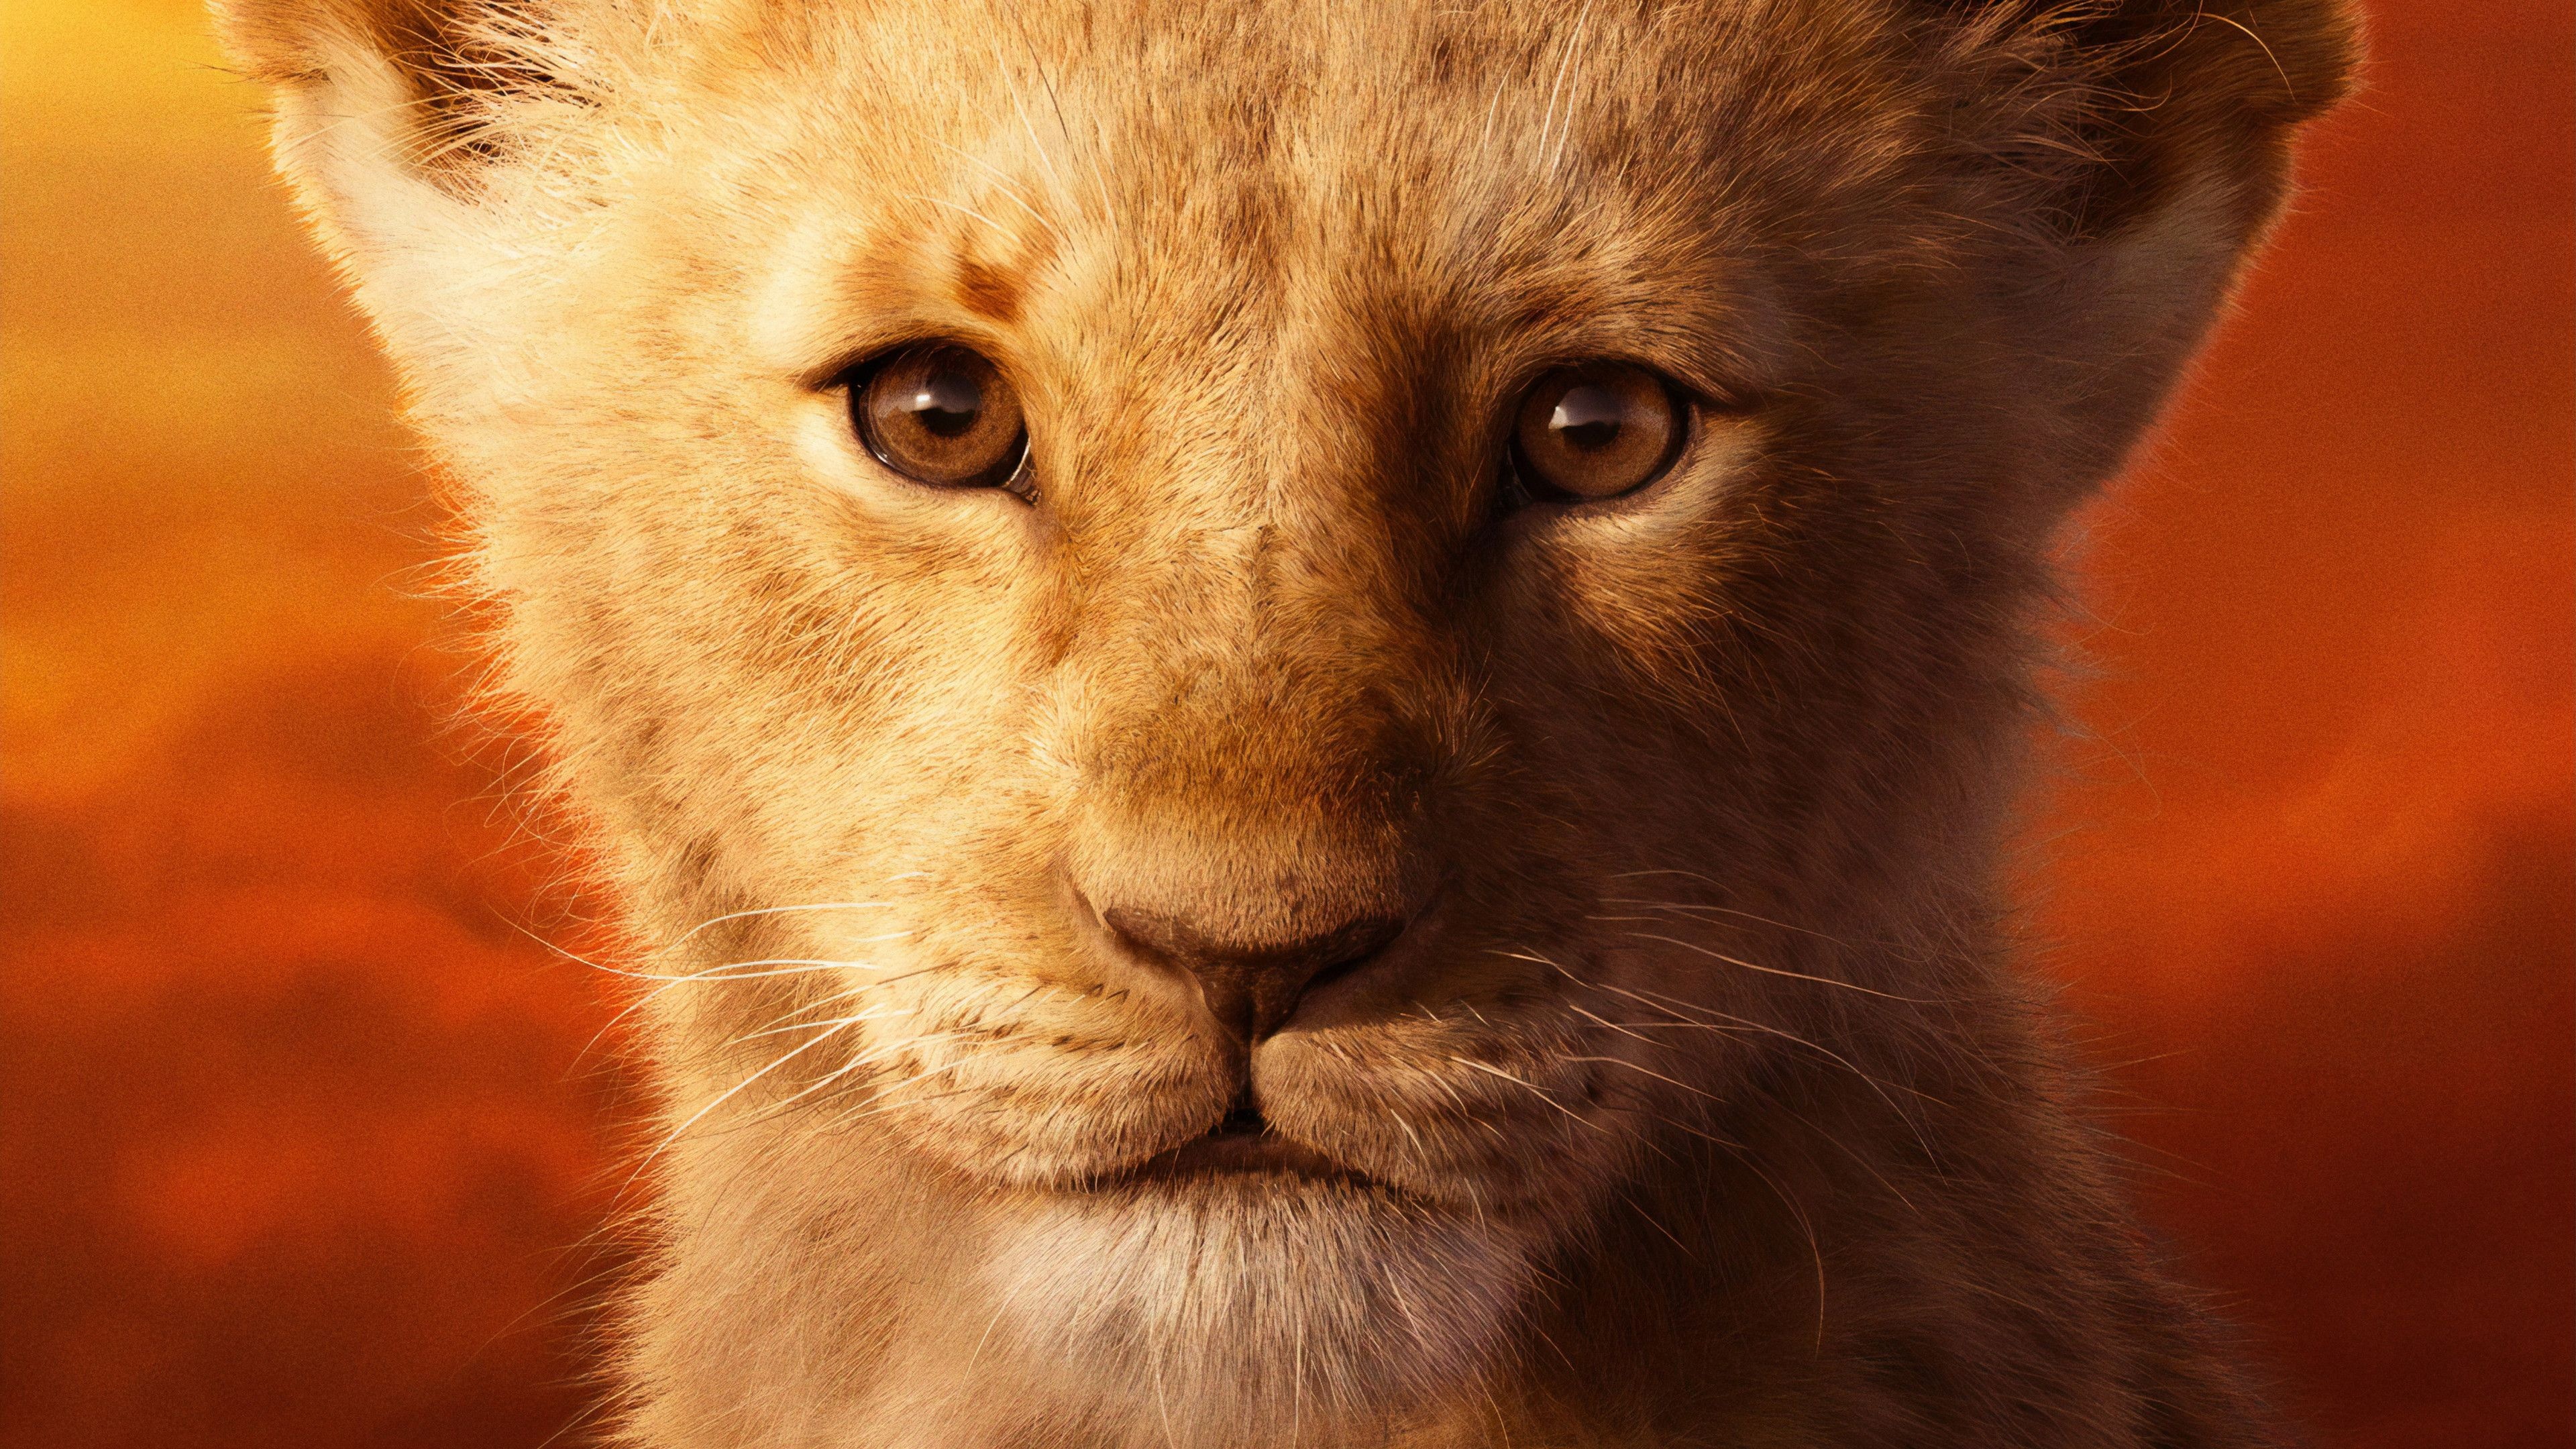 The Lion King, Majestic landscapes, Iconic characters, Timeless story, 3840x2160 4K Desktop